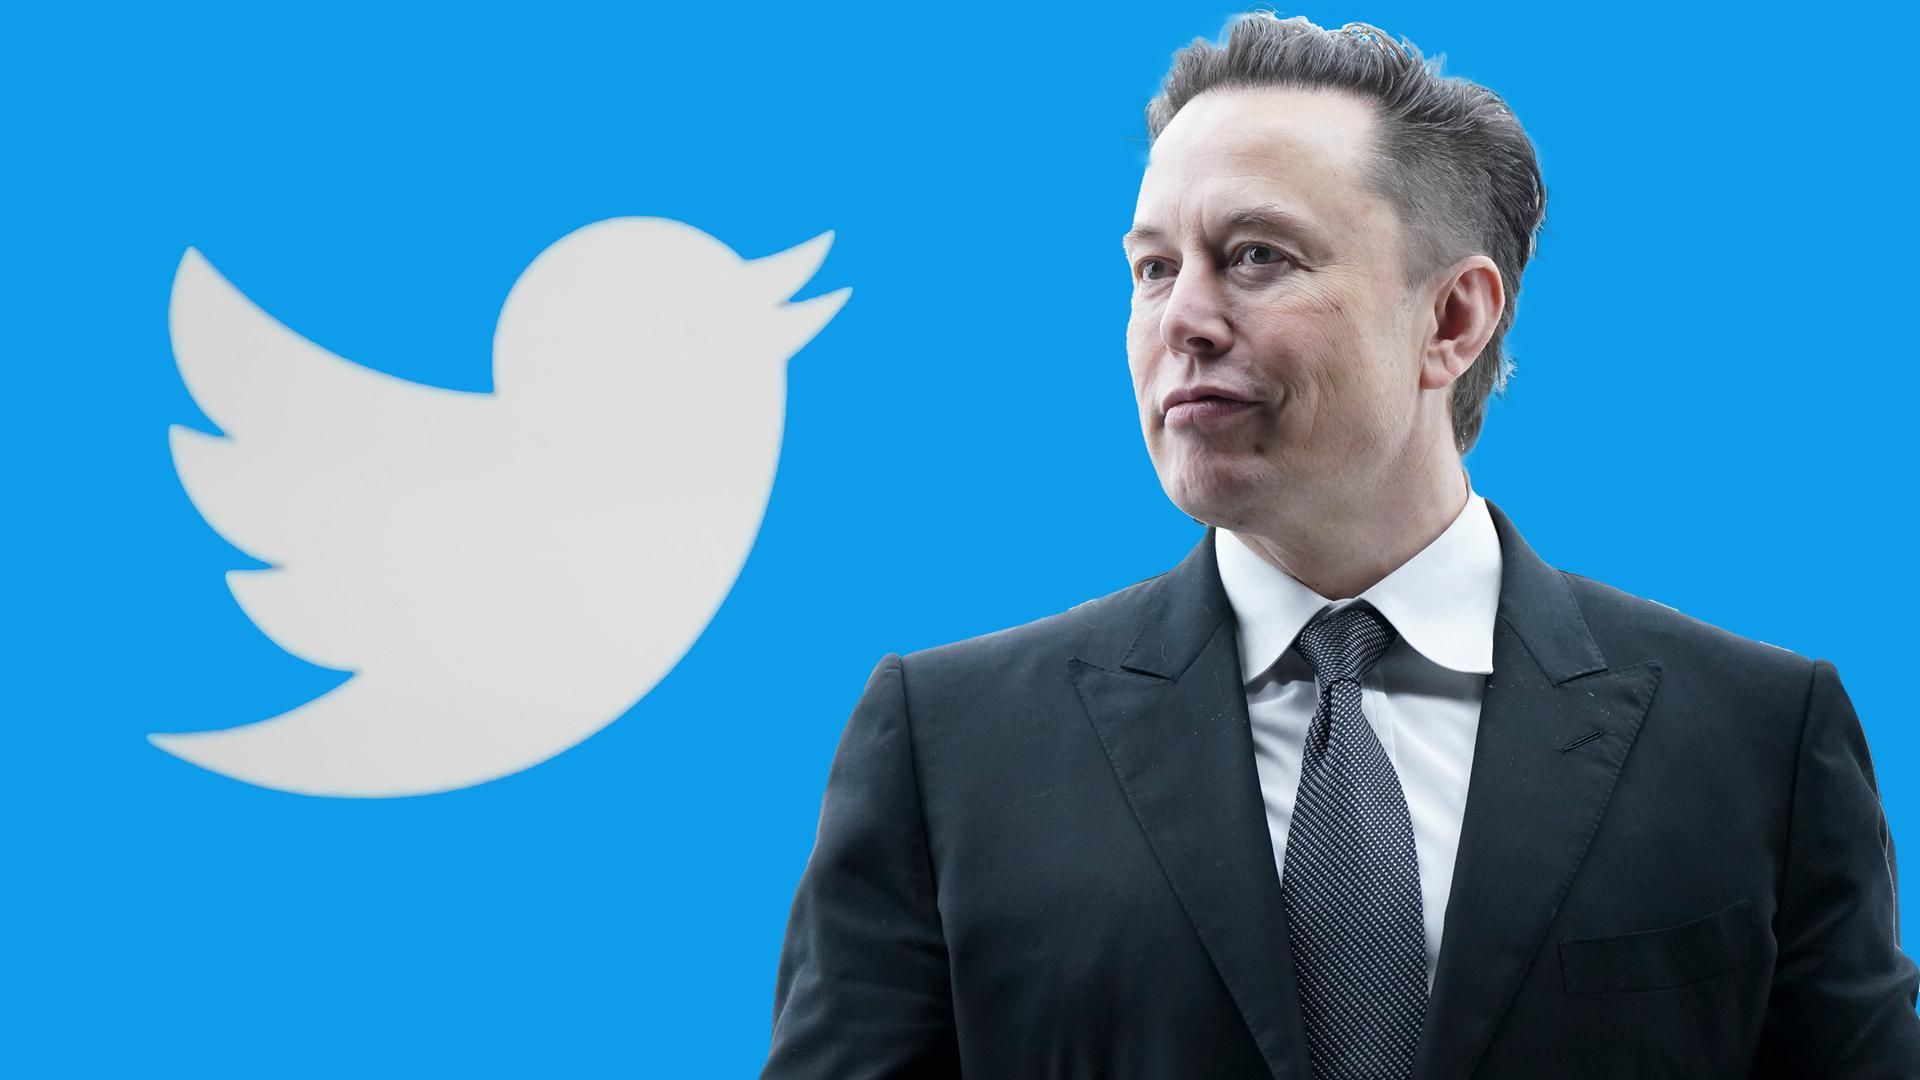 Elon Musk Twitter account suspended: Is it real?